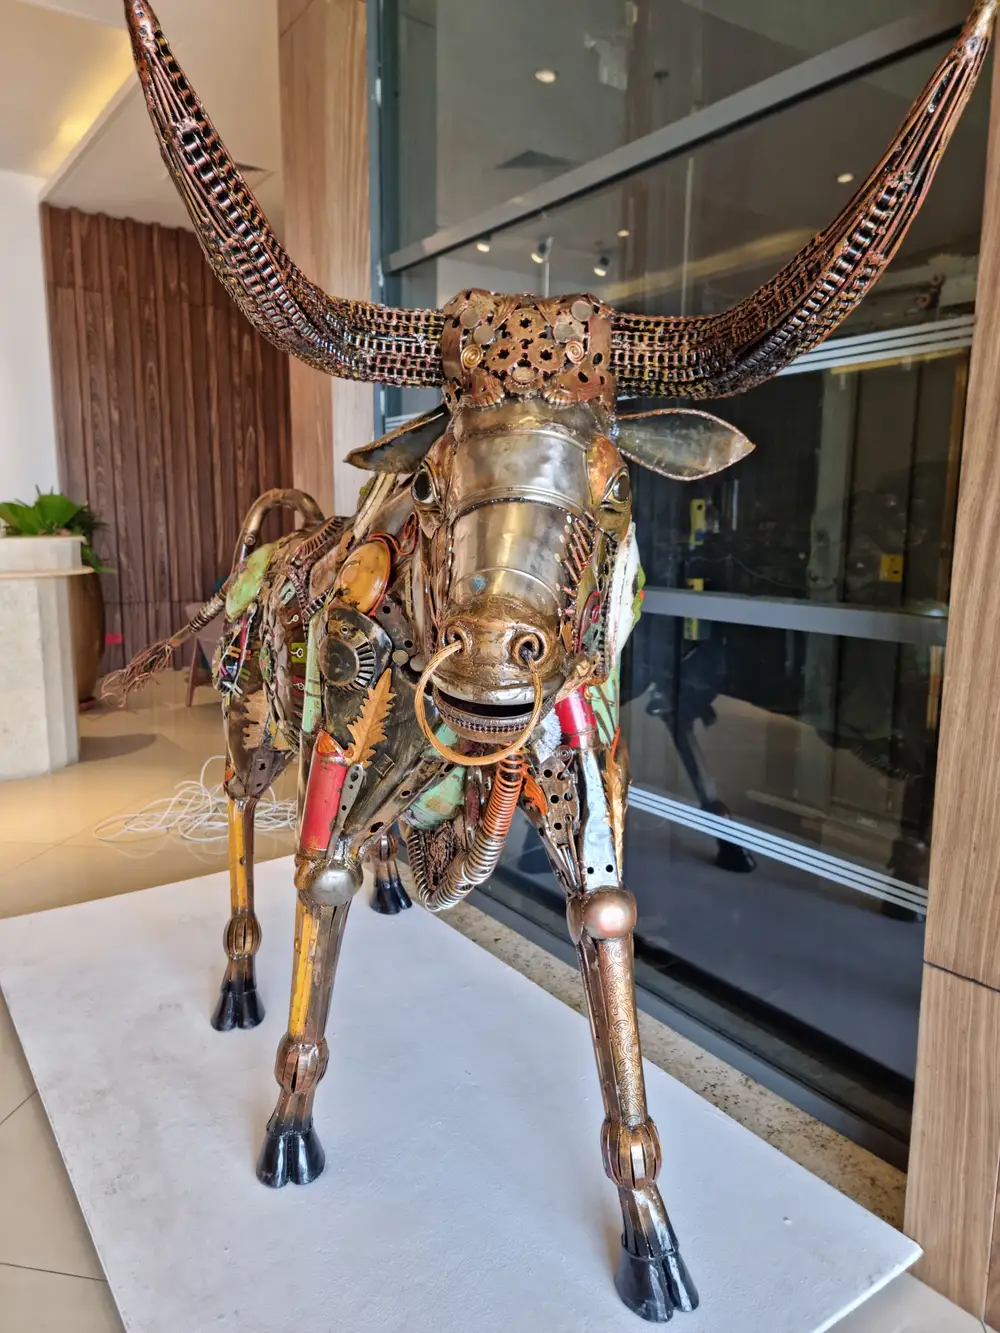 A Bull statue made with metal